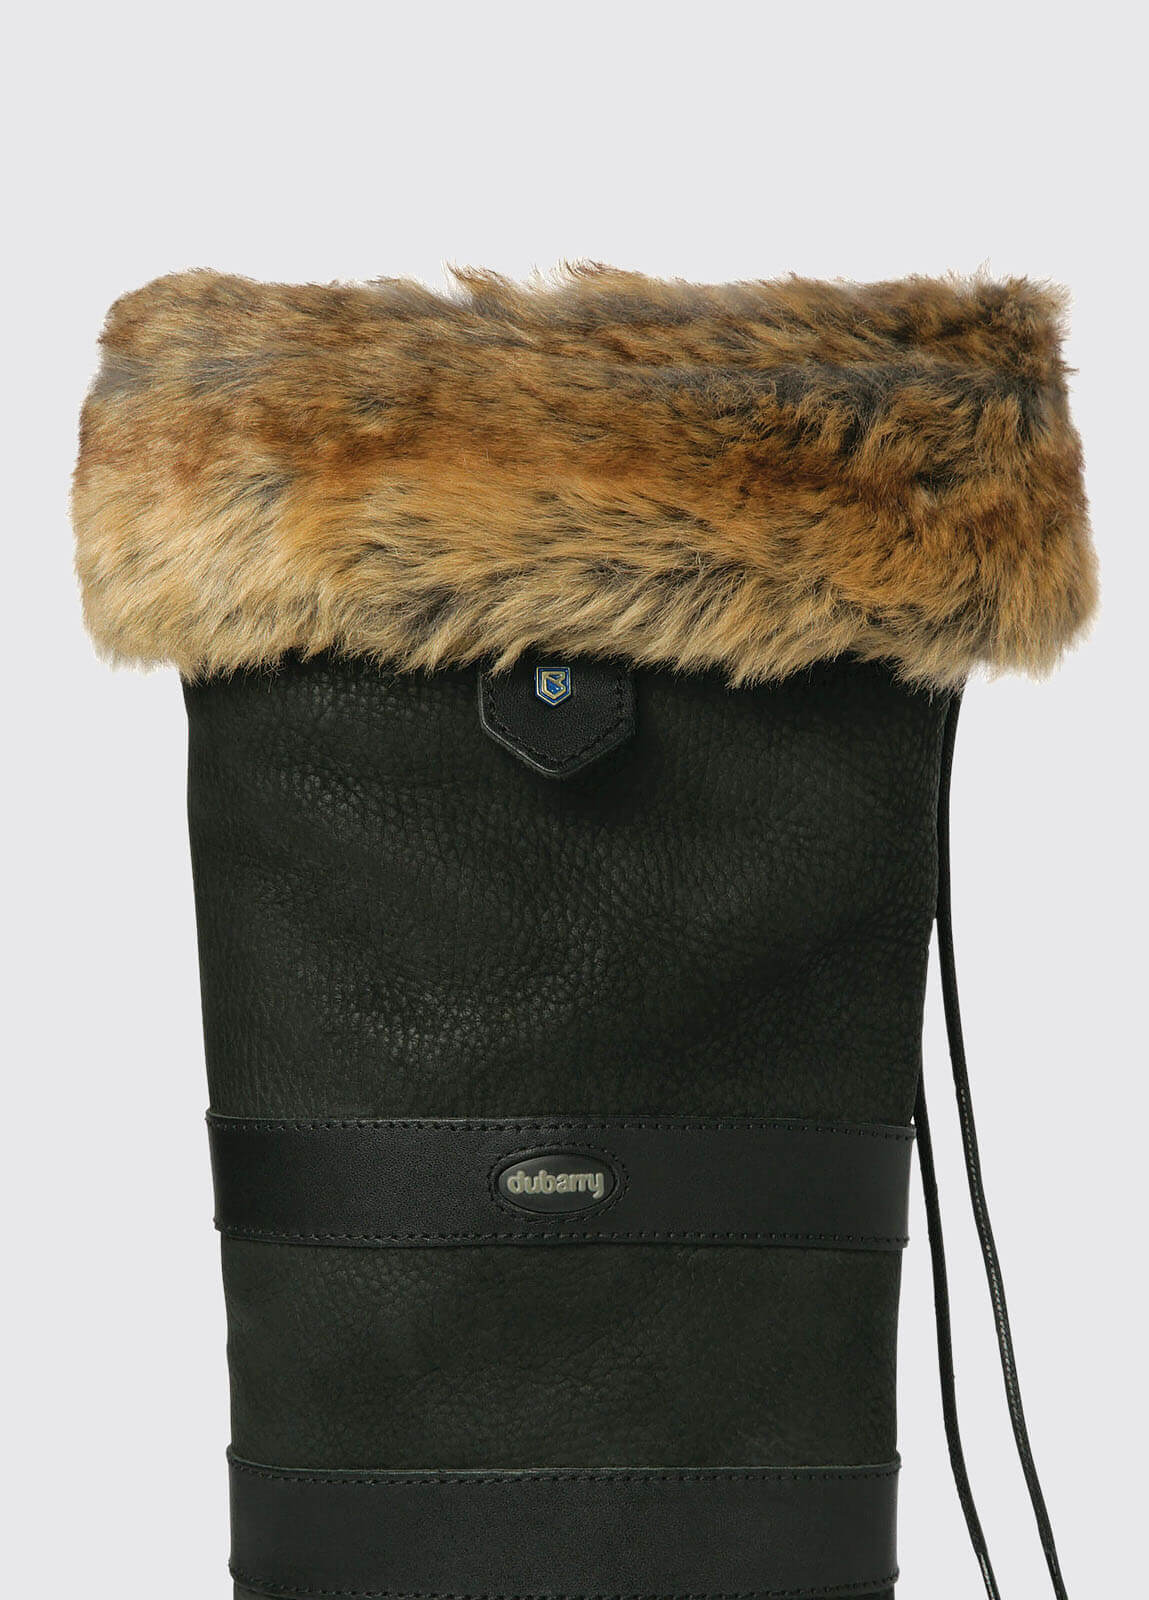 Dubarry of Ireland Faux Fur Boot Liners in Chinchilla